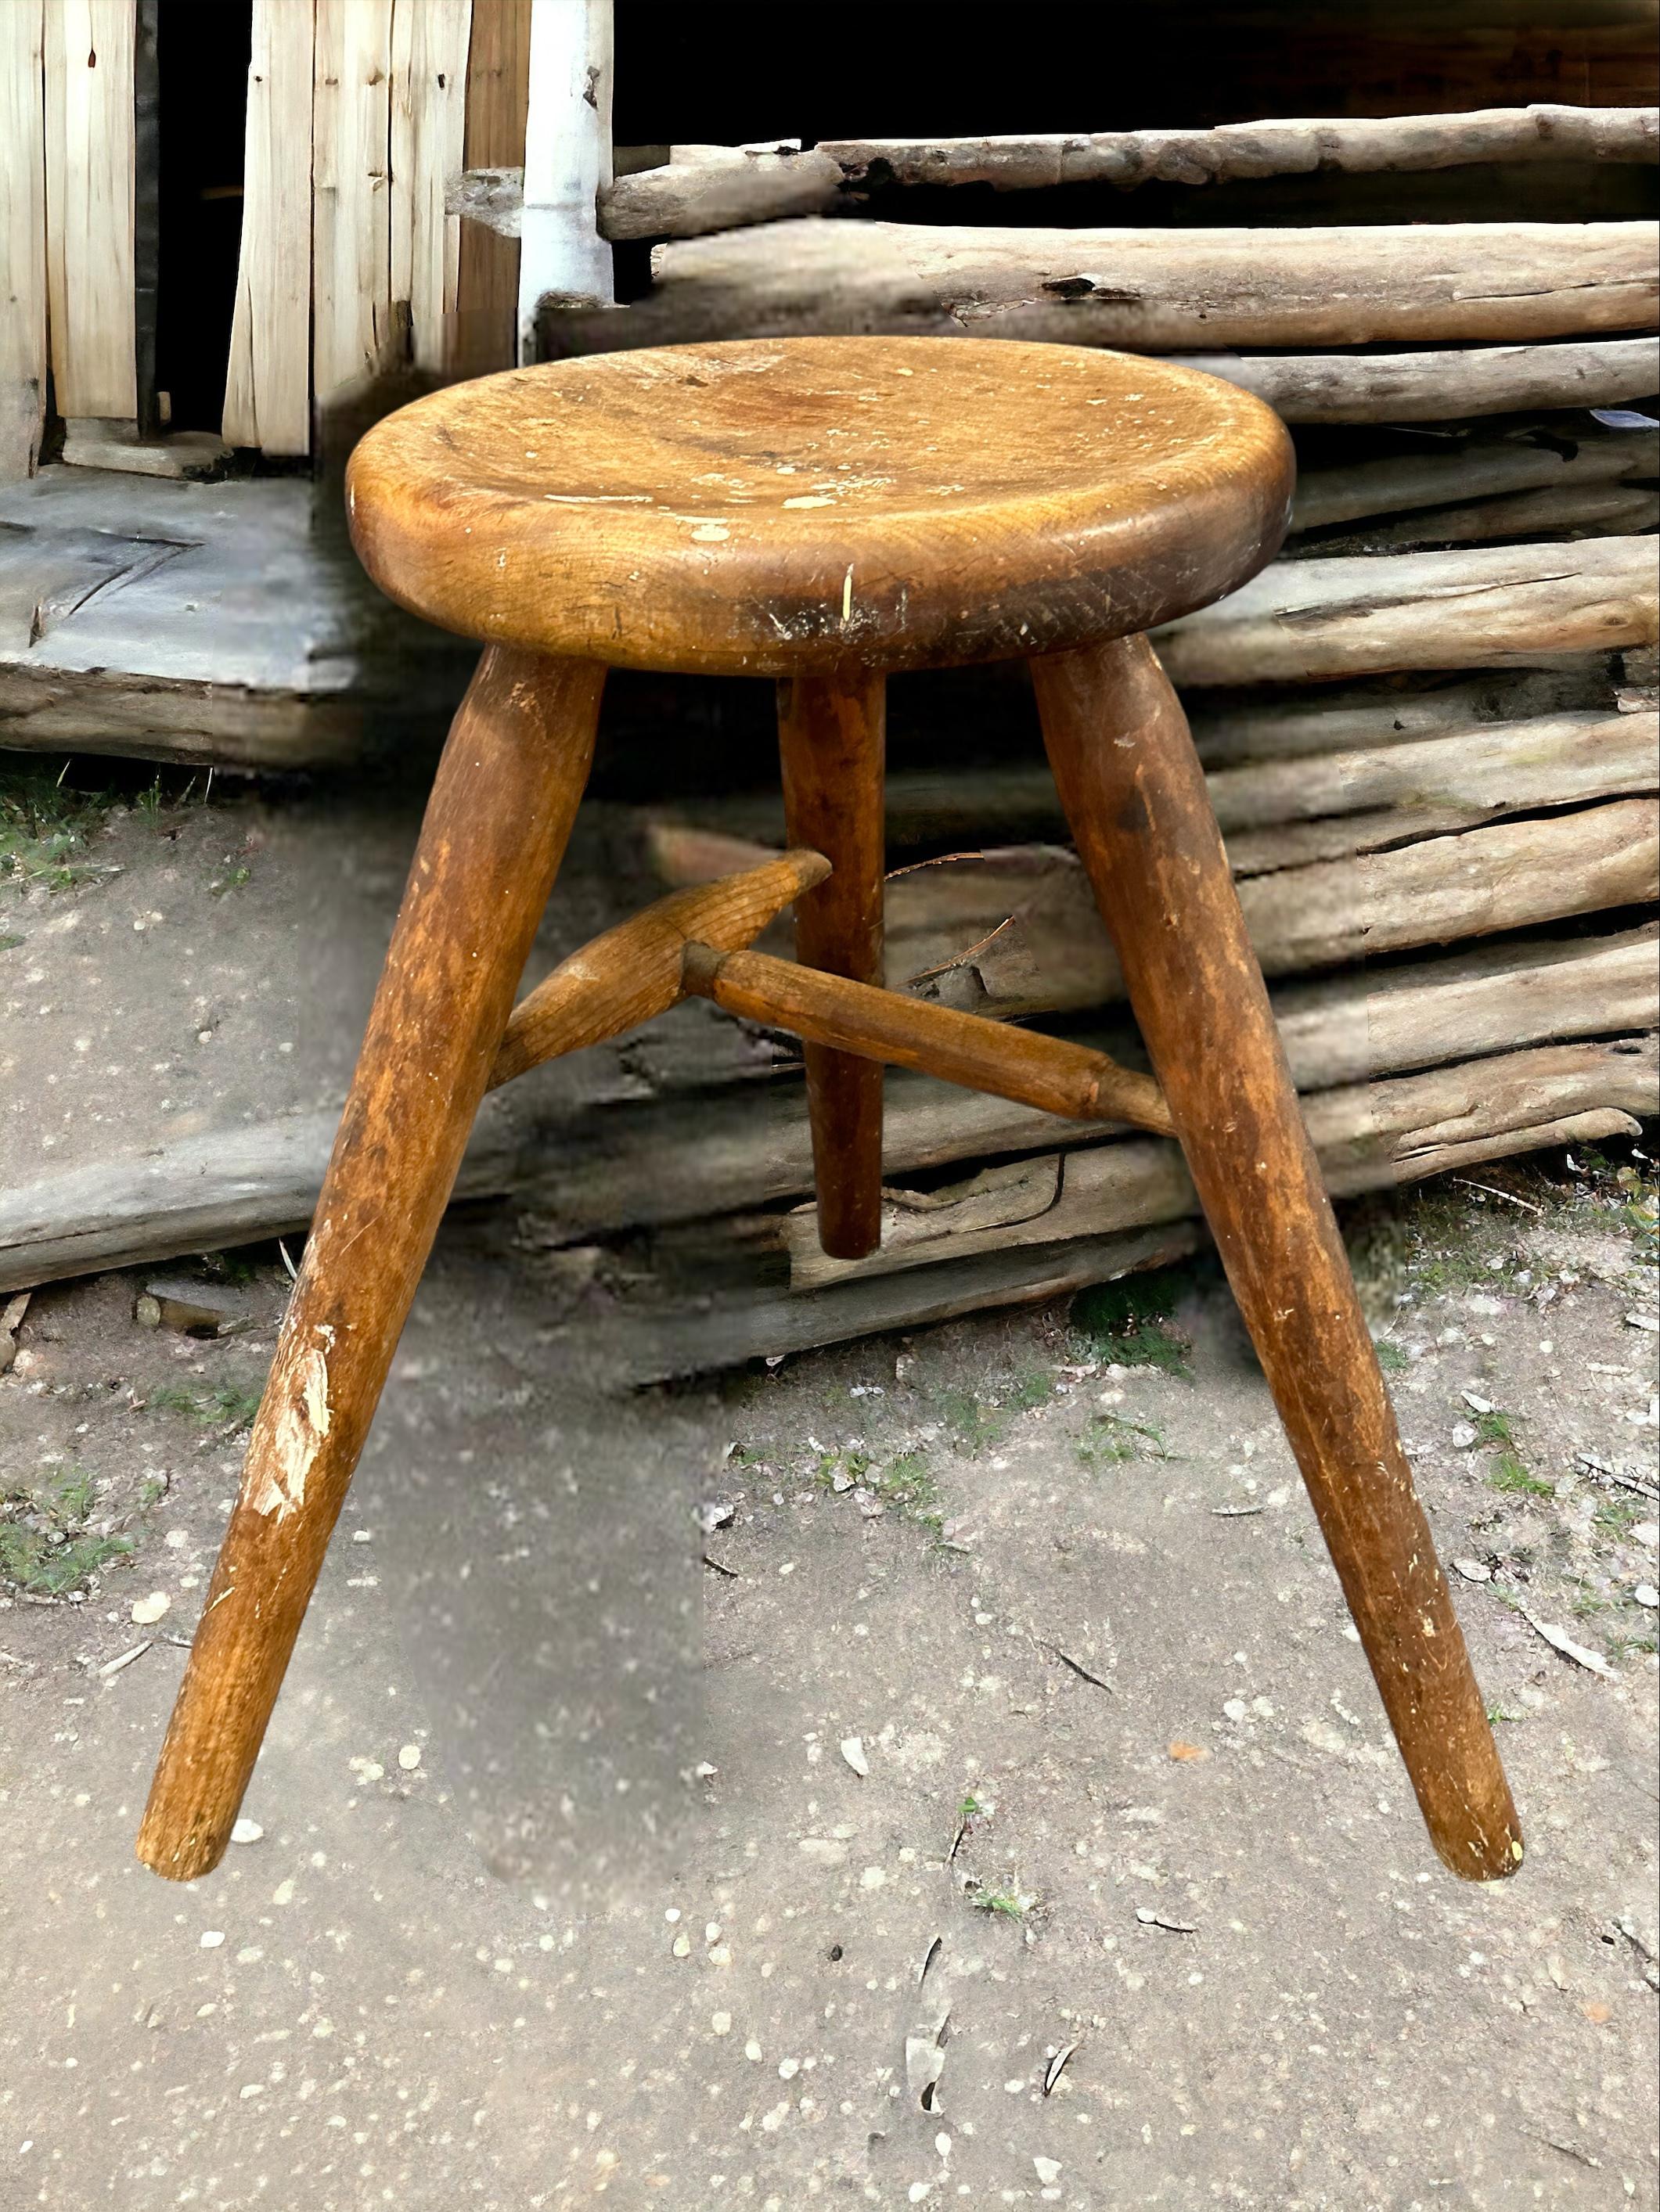 This early 20th century wabi sabi 3 leg workshop stool from Germany is an excellent example of this style. The piece has a square, rustic-looking seat made of wood and is supported by three spindle legs. The stool has a simple, understated design